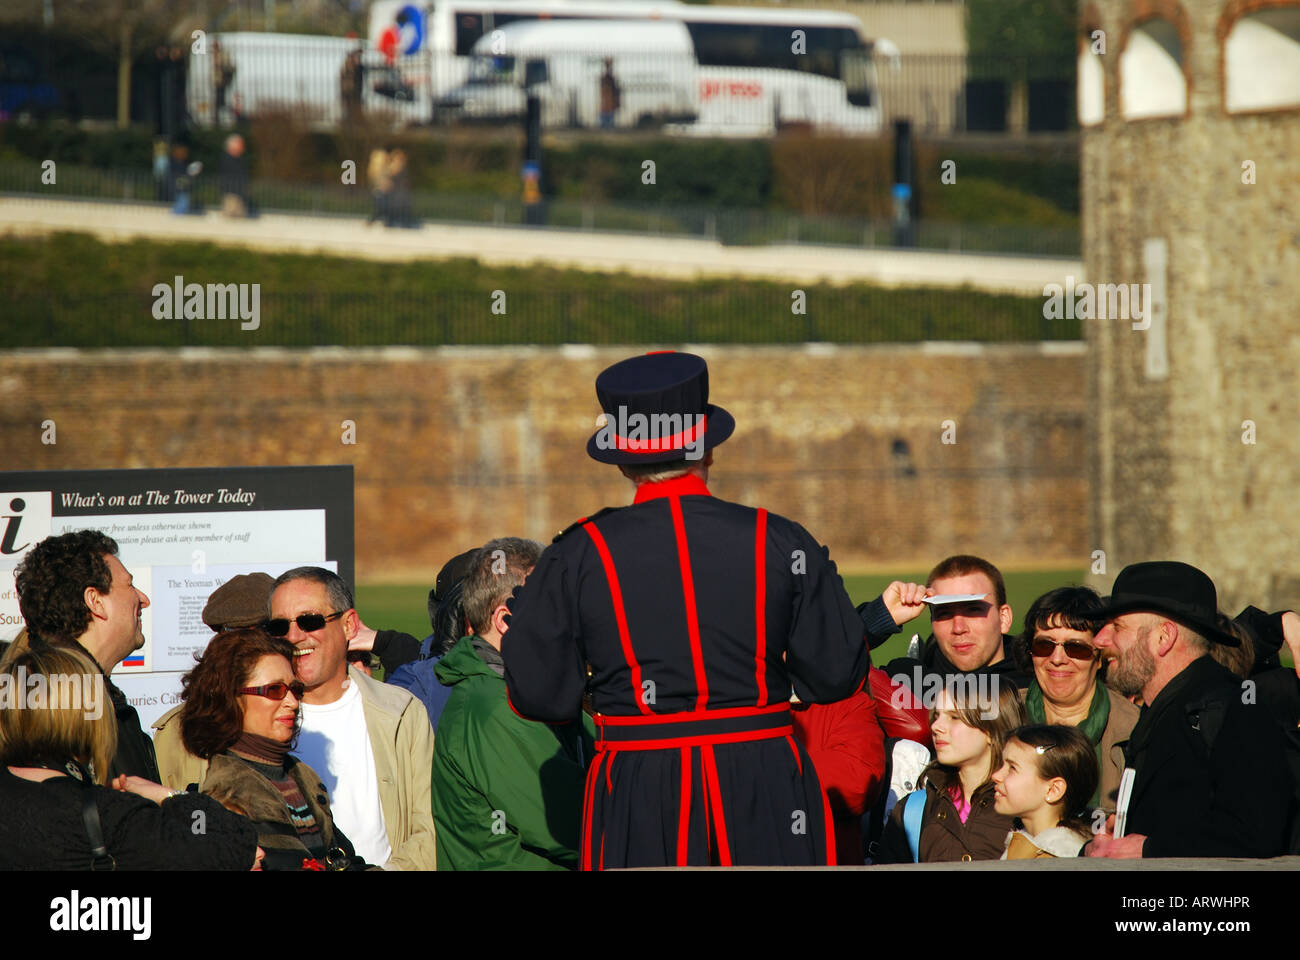 Beefeater (Yeomen Warder) Tour, Torre Di Londra, Tower Hill, London Borough Of Tower Hamlets, Greater London, Inghilterra, Regno Unito Foto Stock